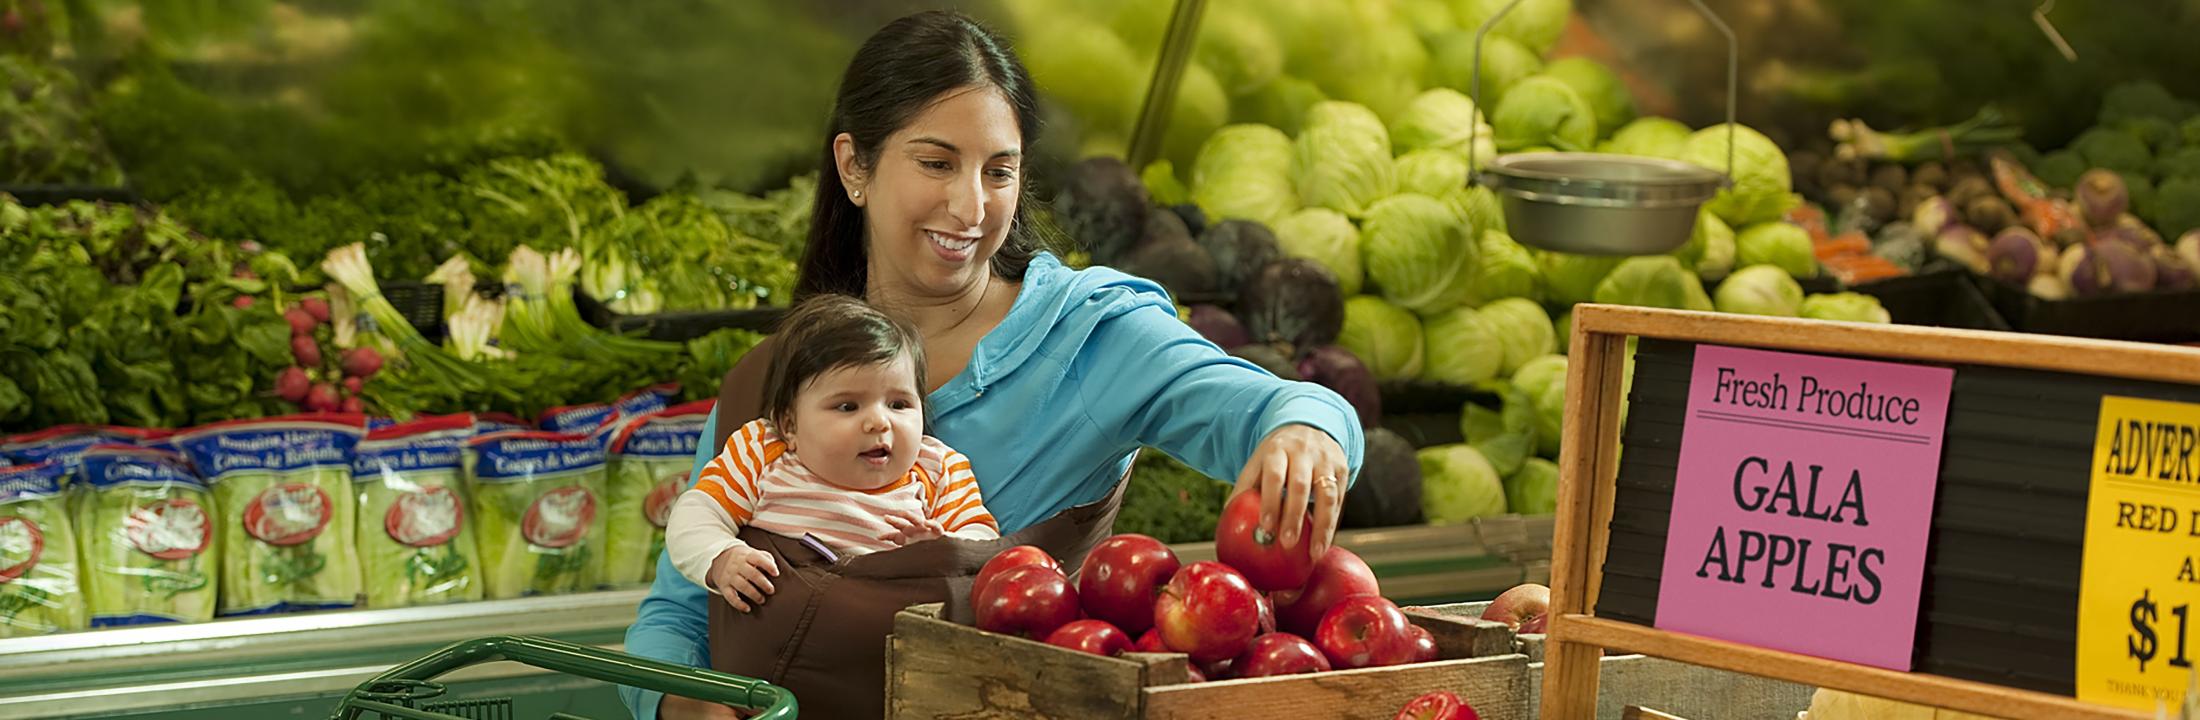 A diverse woman at a supermarket holding an infant while selecting an apple.